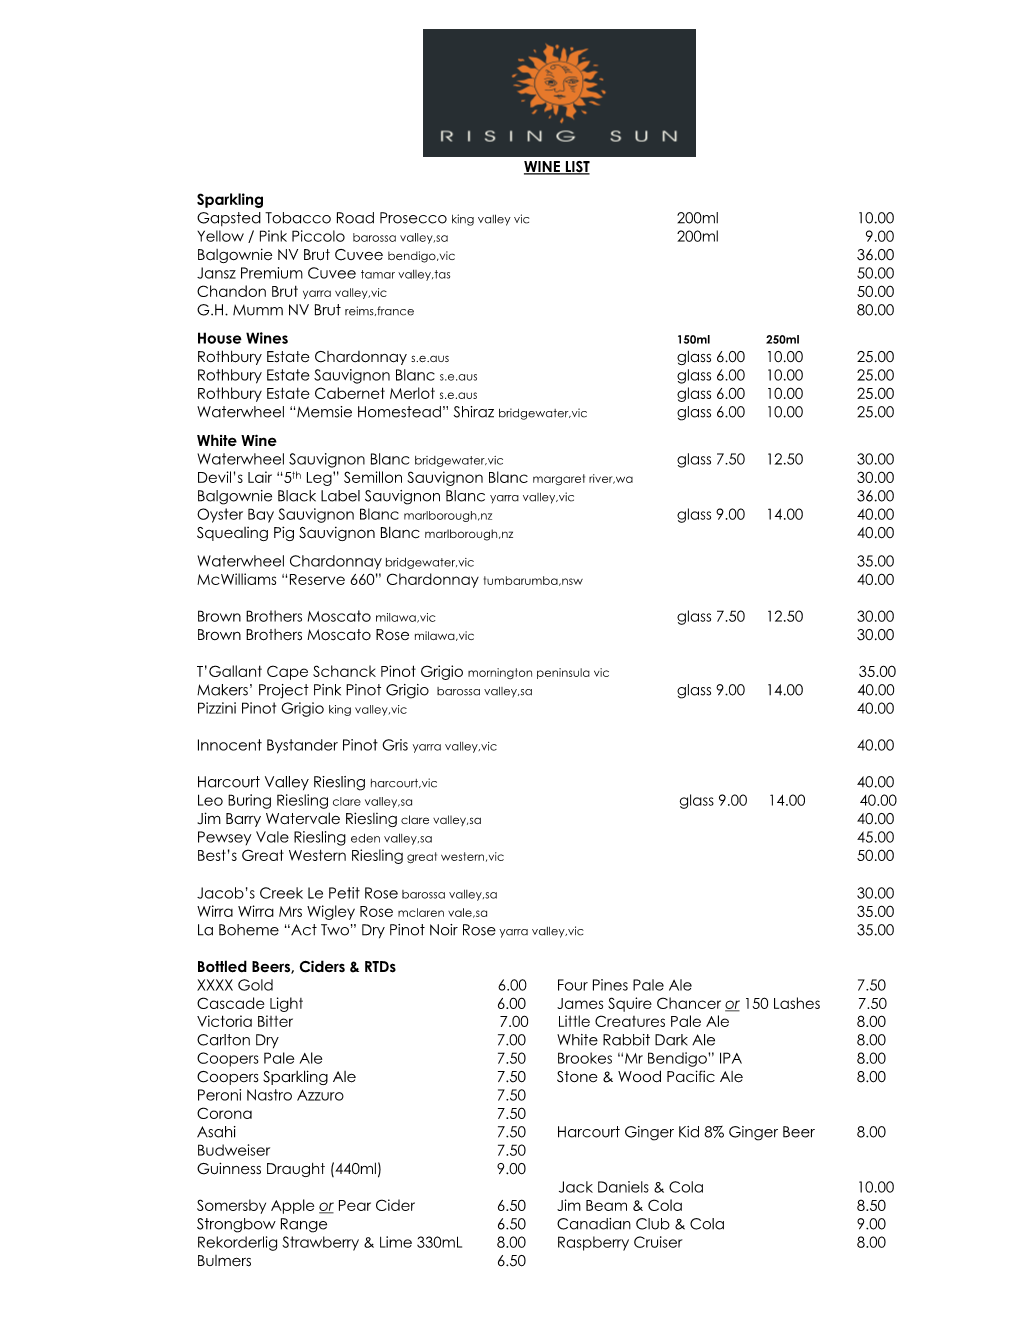 WINE LIST Sparkling Gapsted Tobacco Road Prosecco King Valley